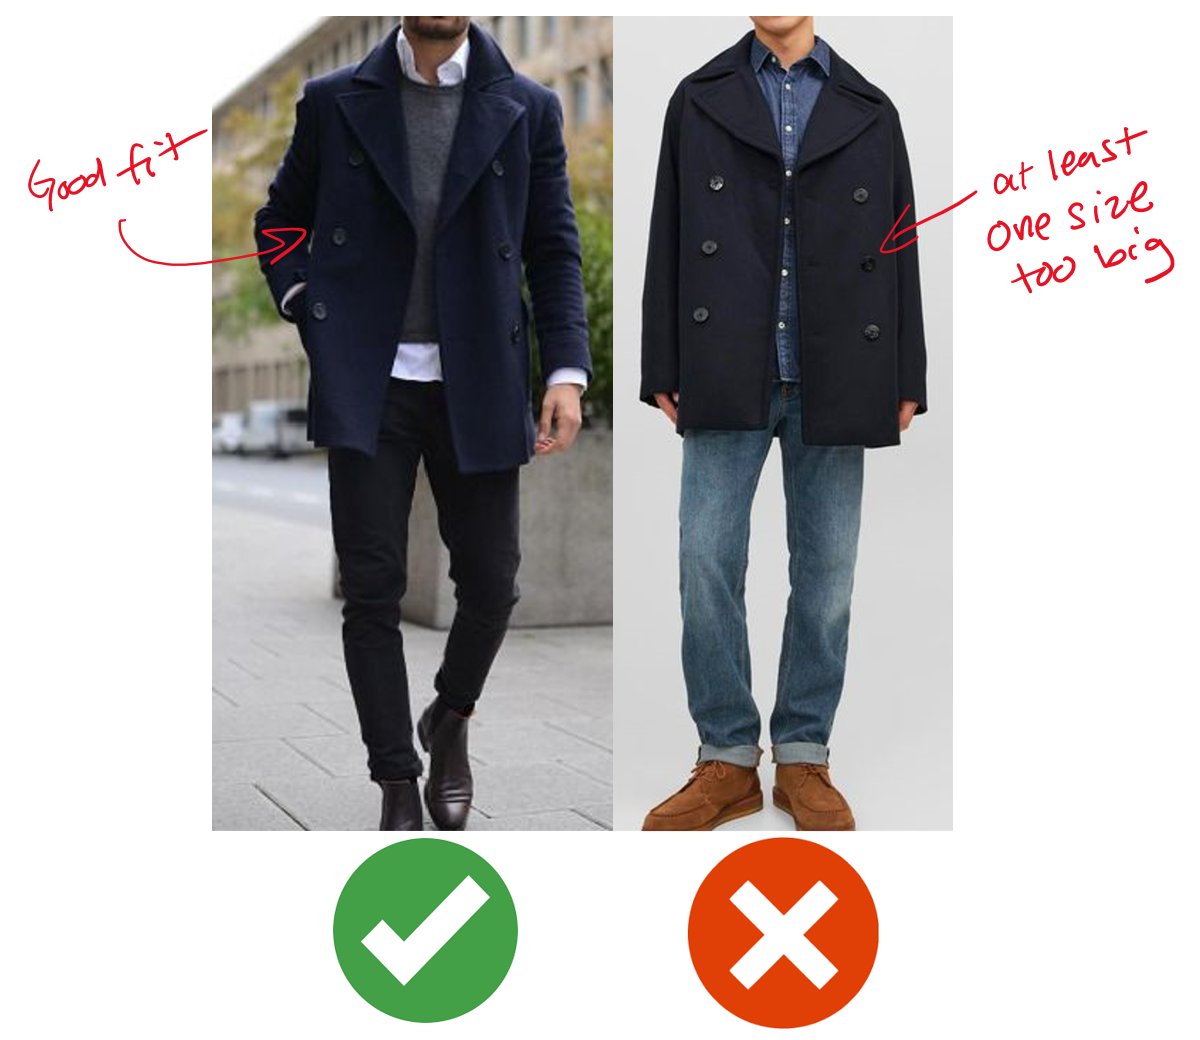 WellBuiltStyle on X: When your pea coat is worn unbuttoned it still needs  to have shape. Most guys are wearing coats that are least one size too big  for them. This kills